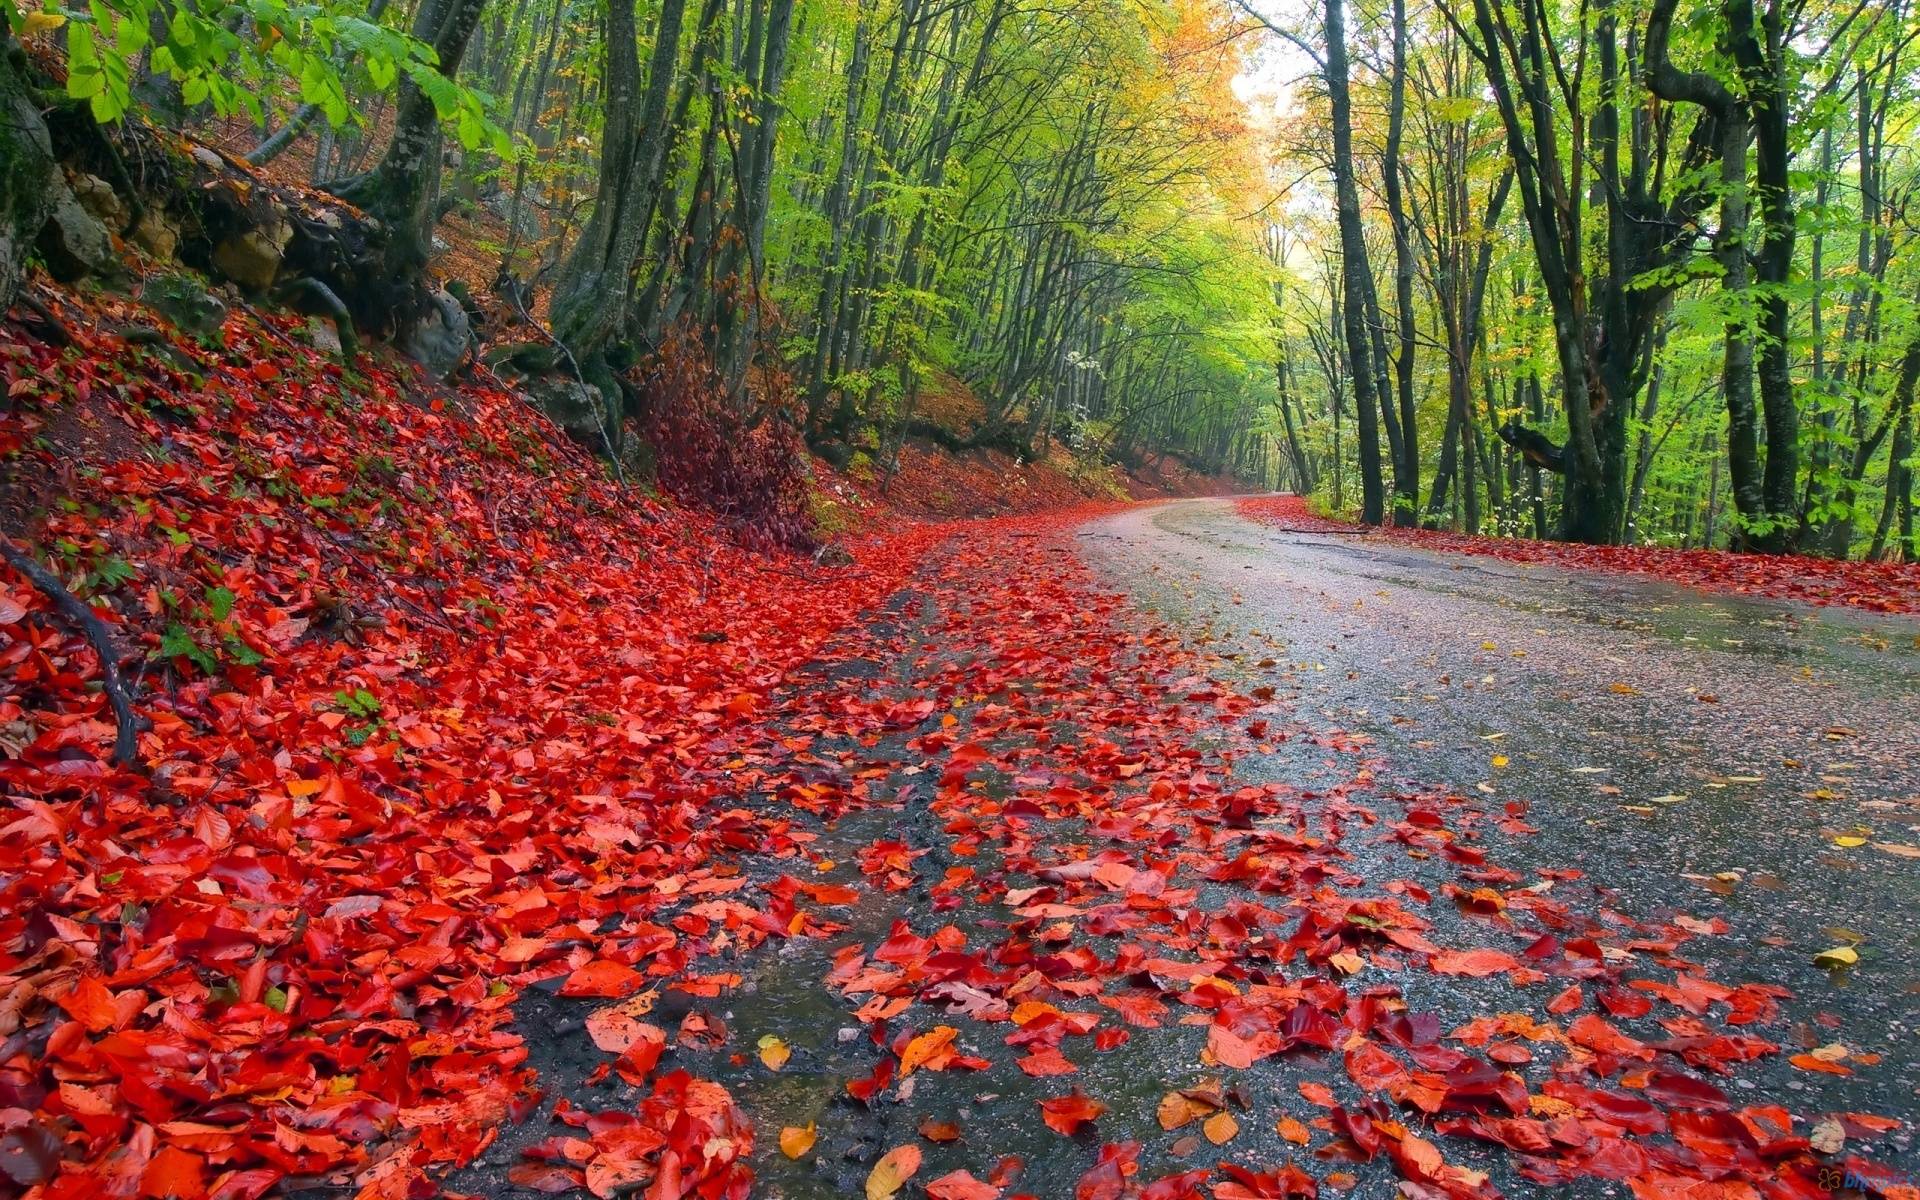 Red leaves on the road - Nature is beautiful